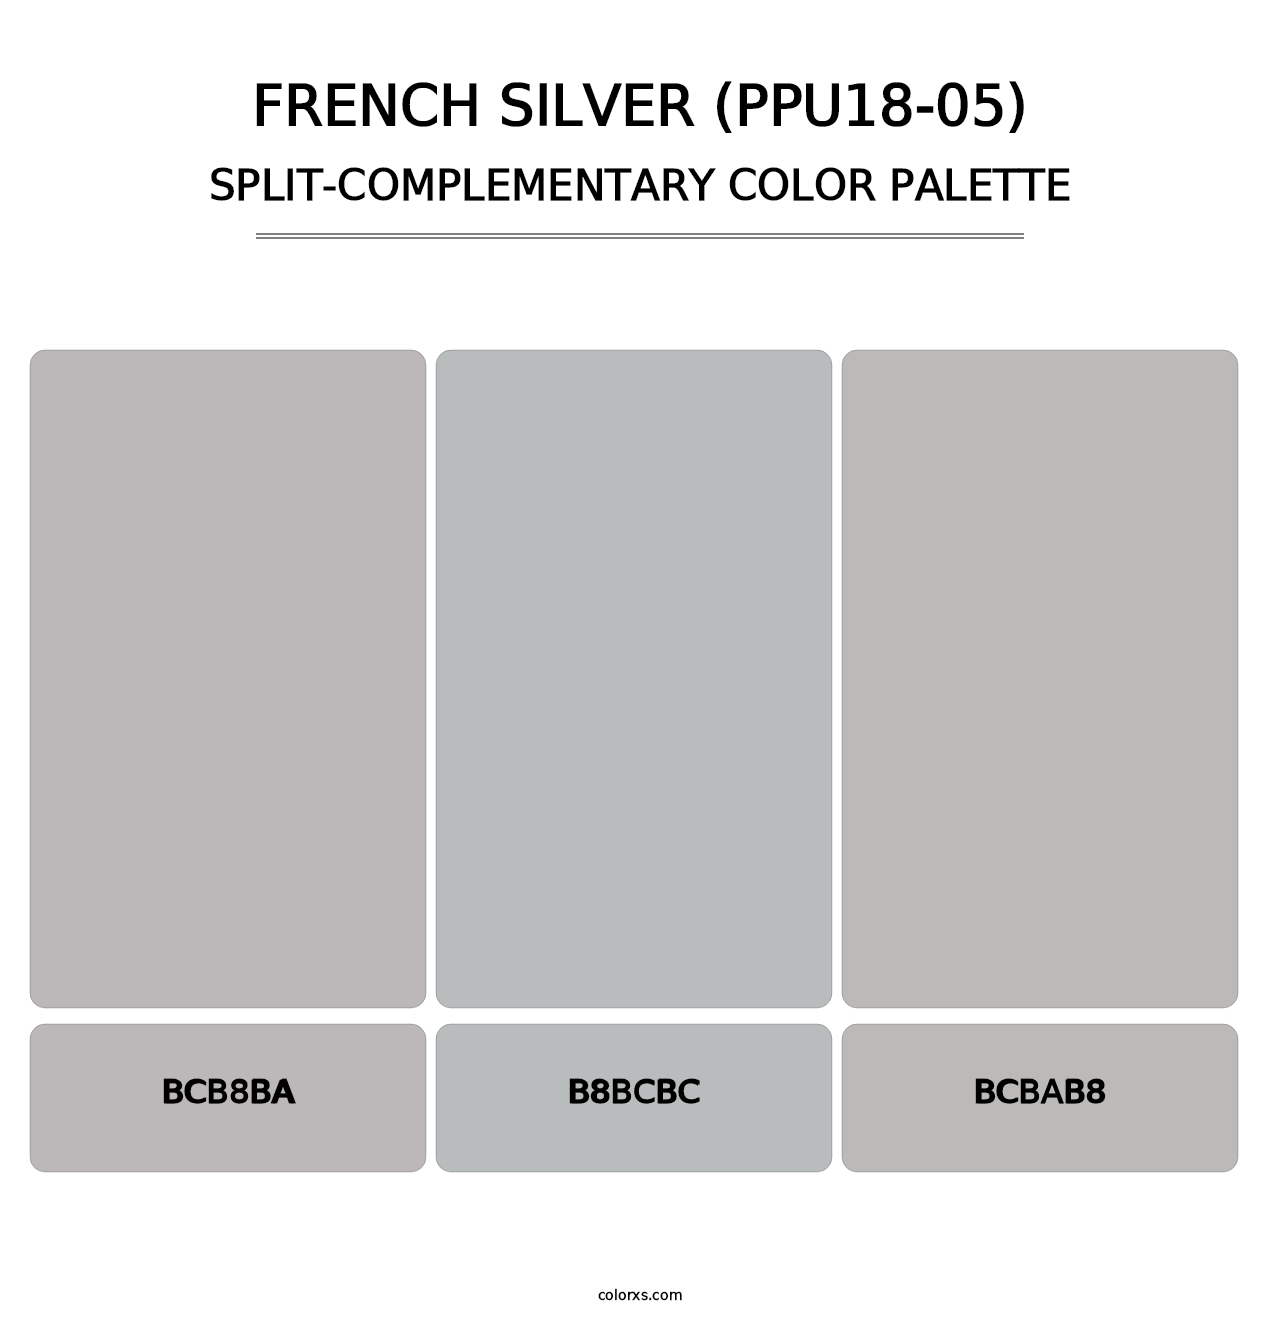 French Silver (PPU18-05) - Split-Complementary Color Palette